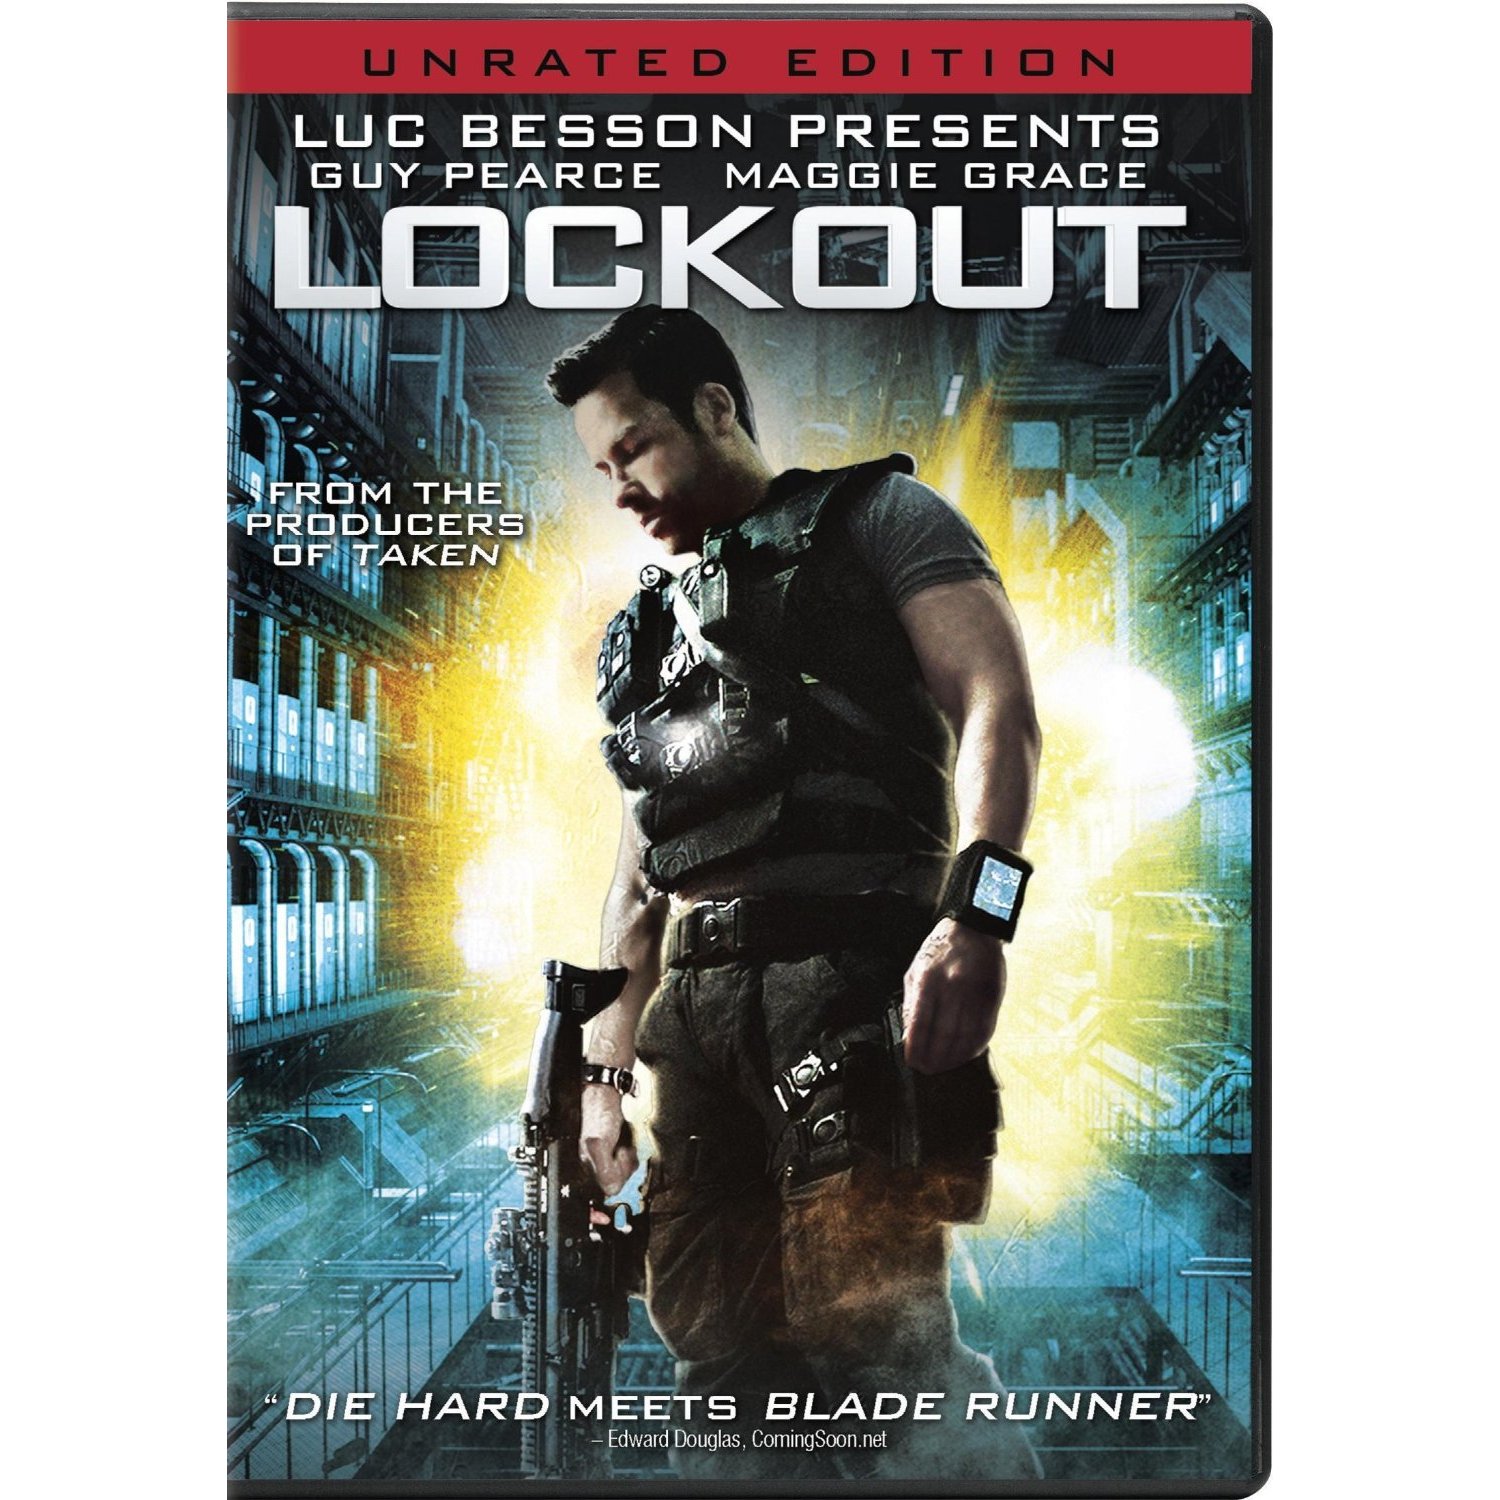 The Lockout